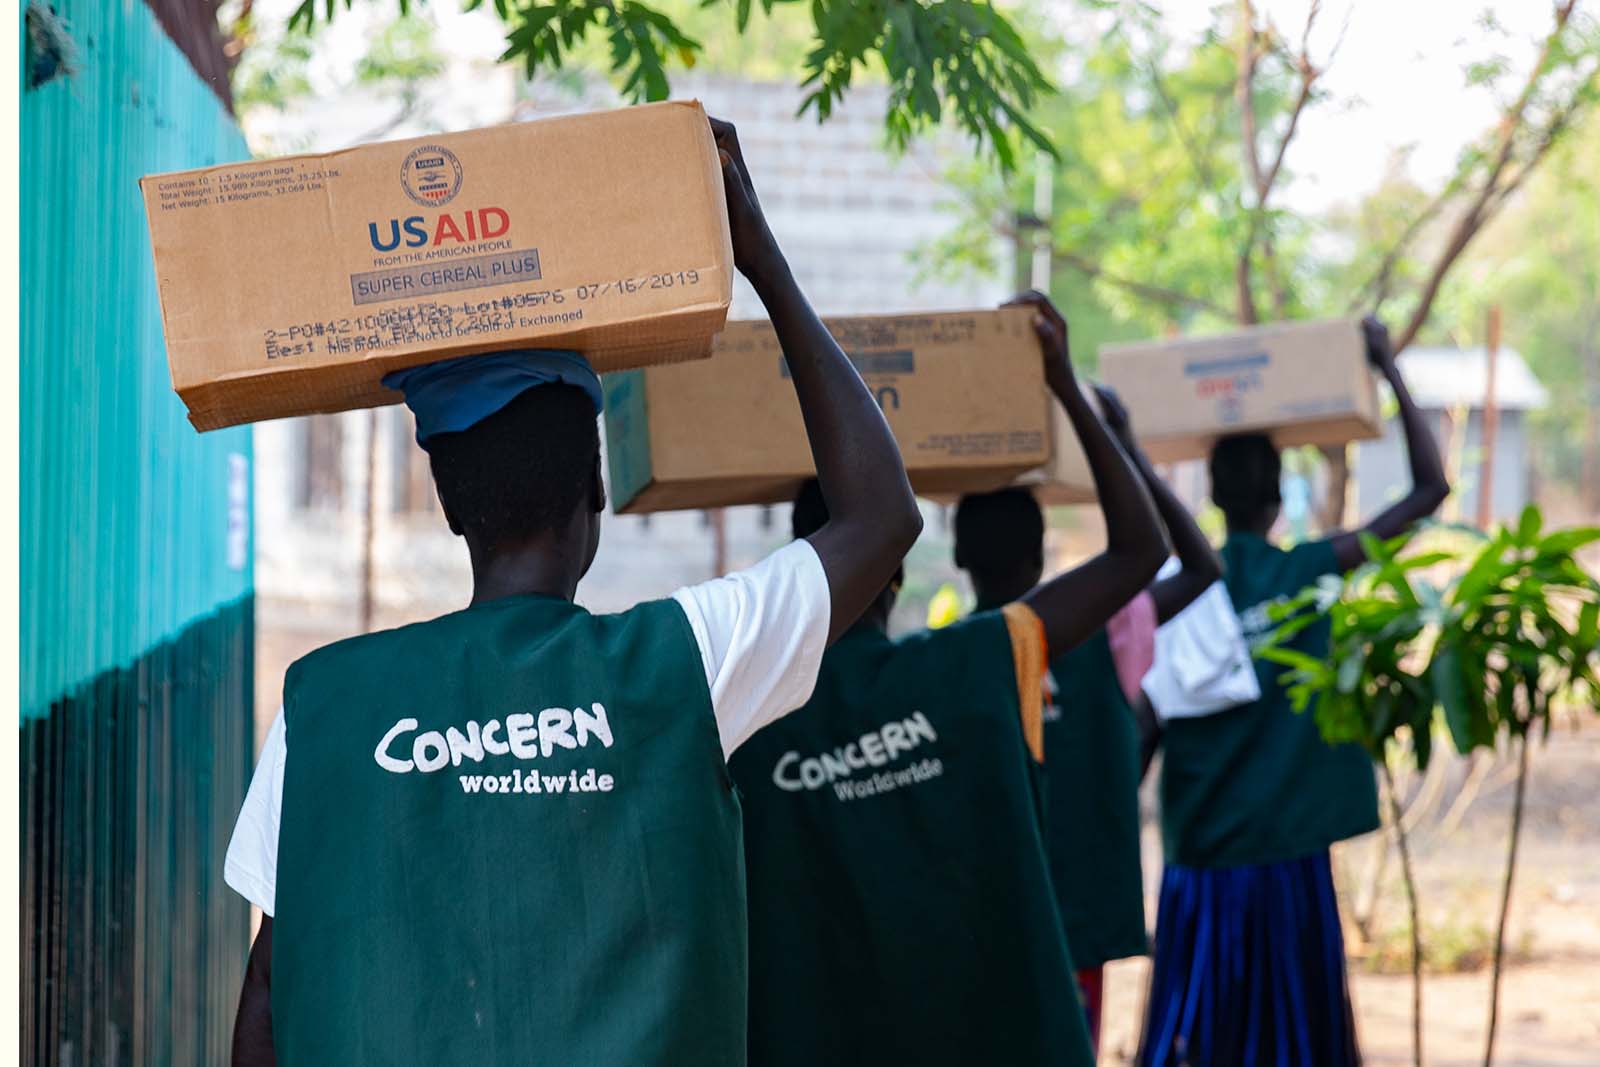 Concern staff carrying nutrition supplies in Ethiopia